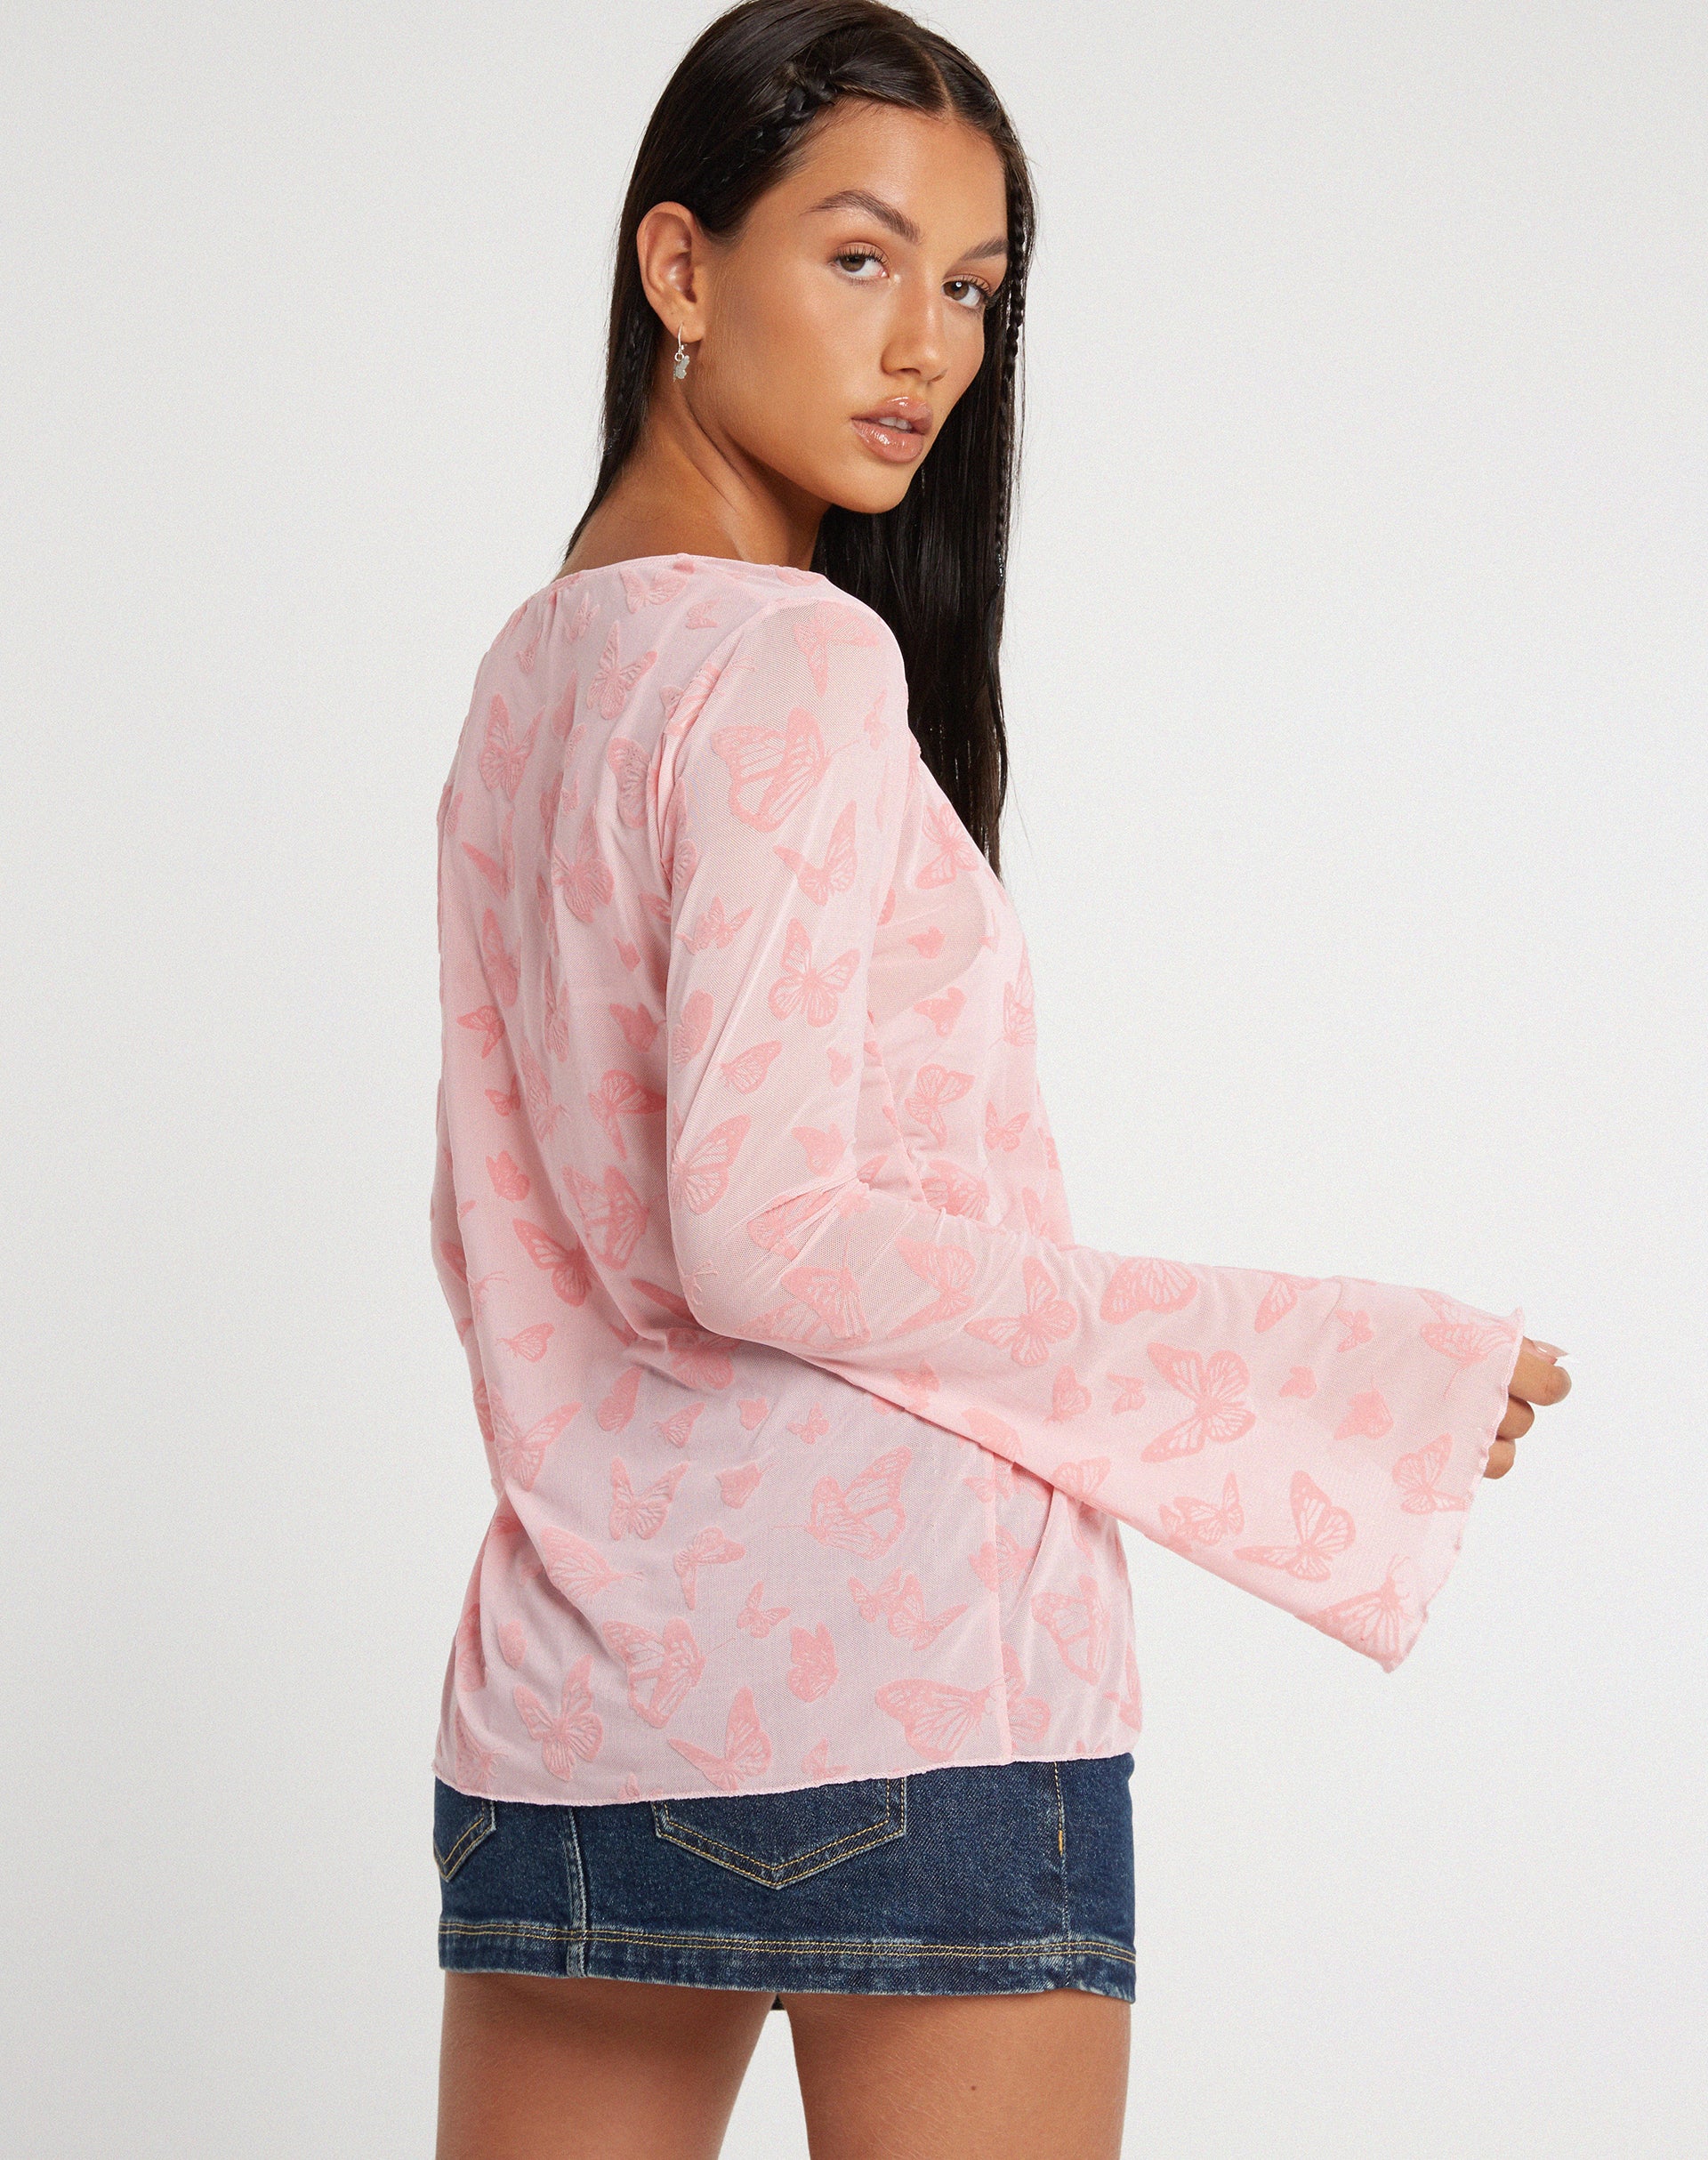 image of Leony Cardi in Butterfly Pink Flock